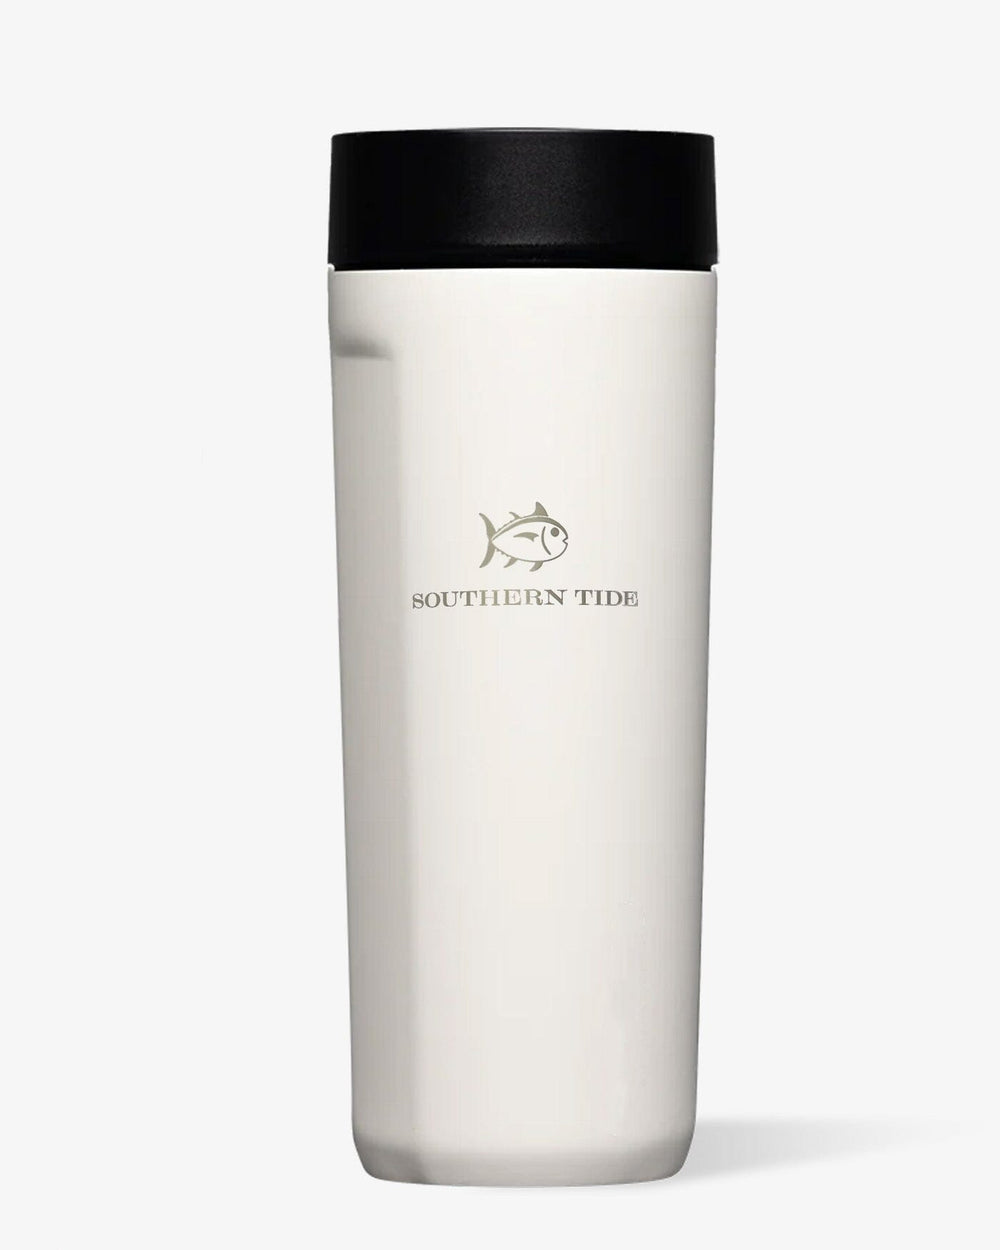 The front view of the Commuter Cup 17oz by Southern Tide - White